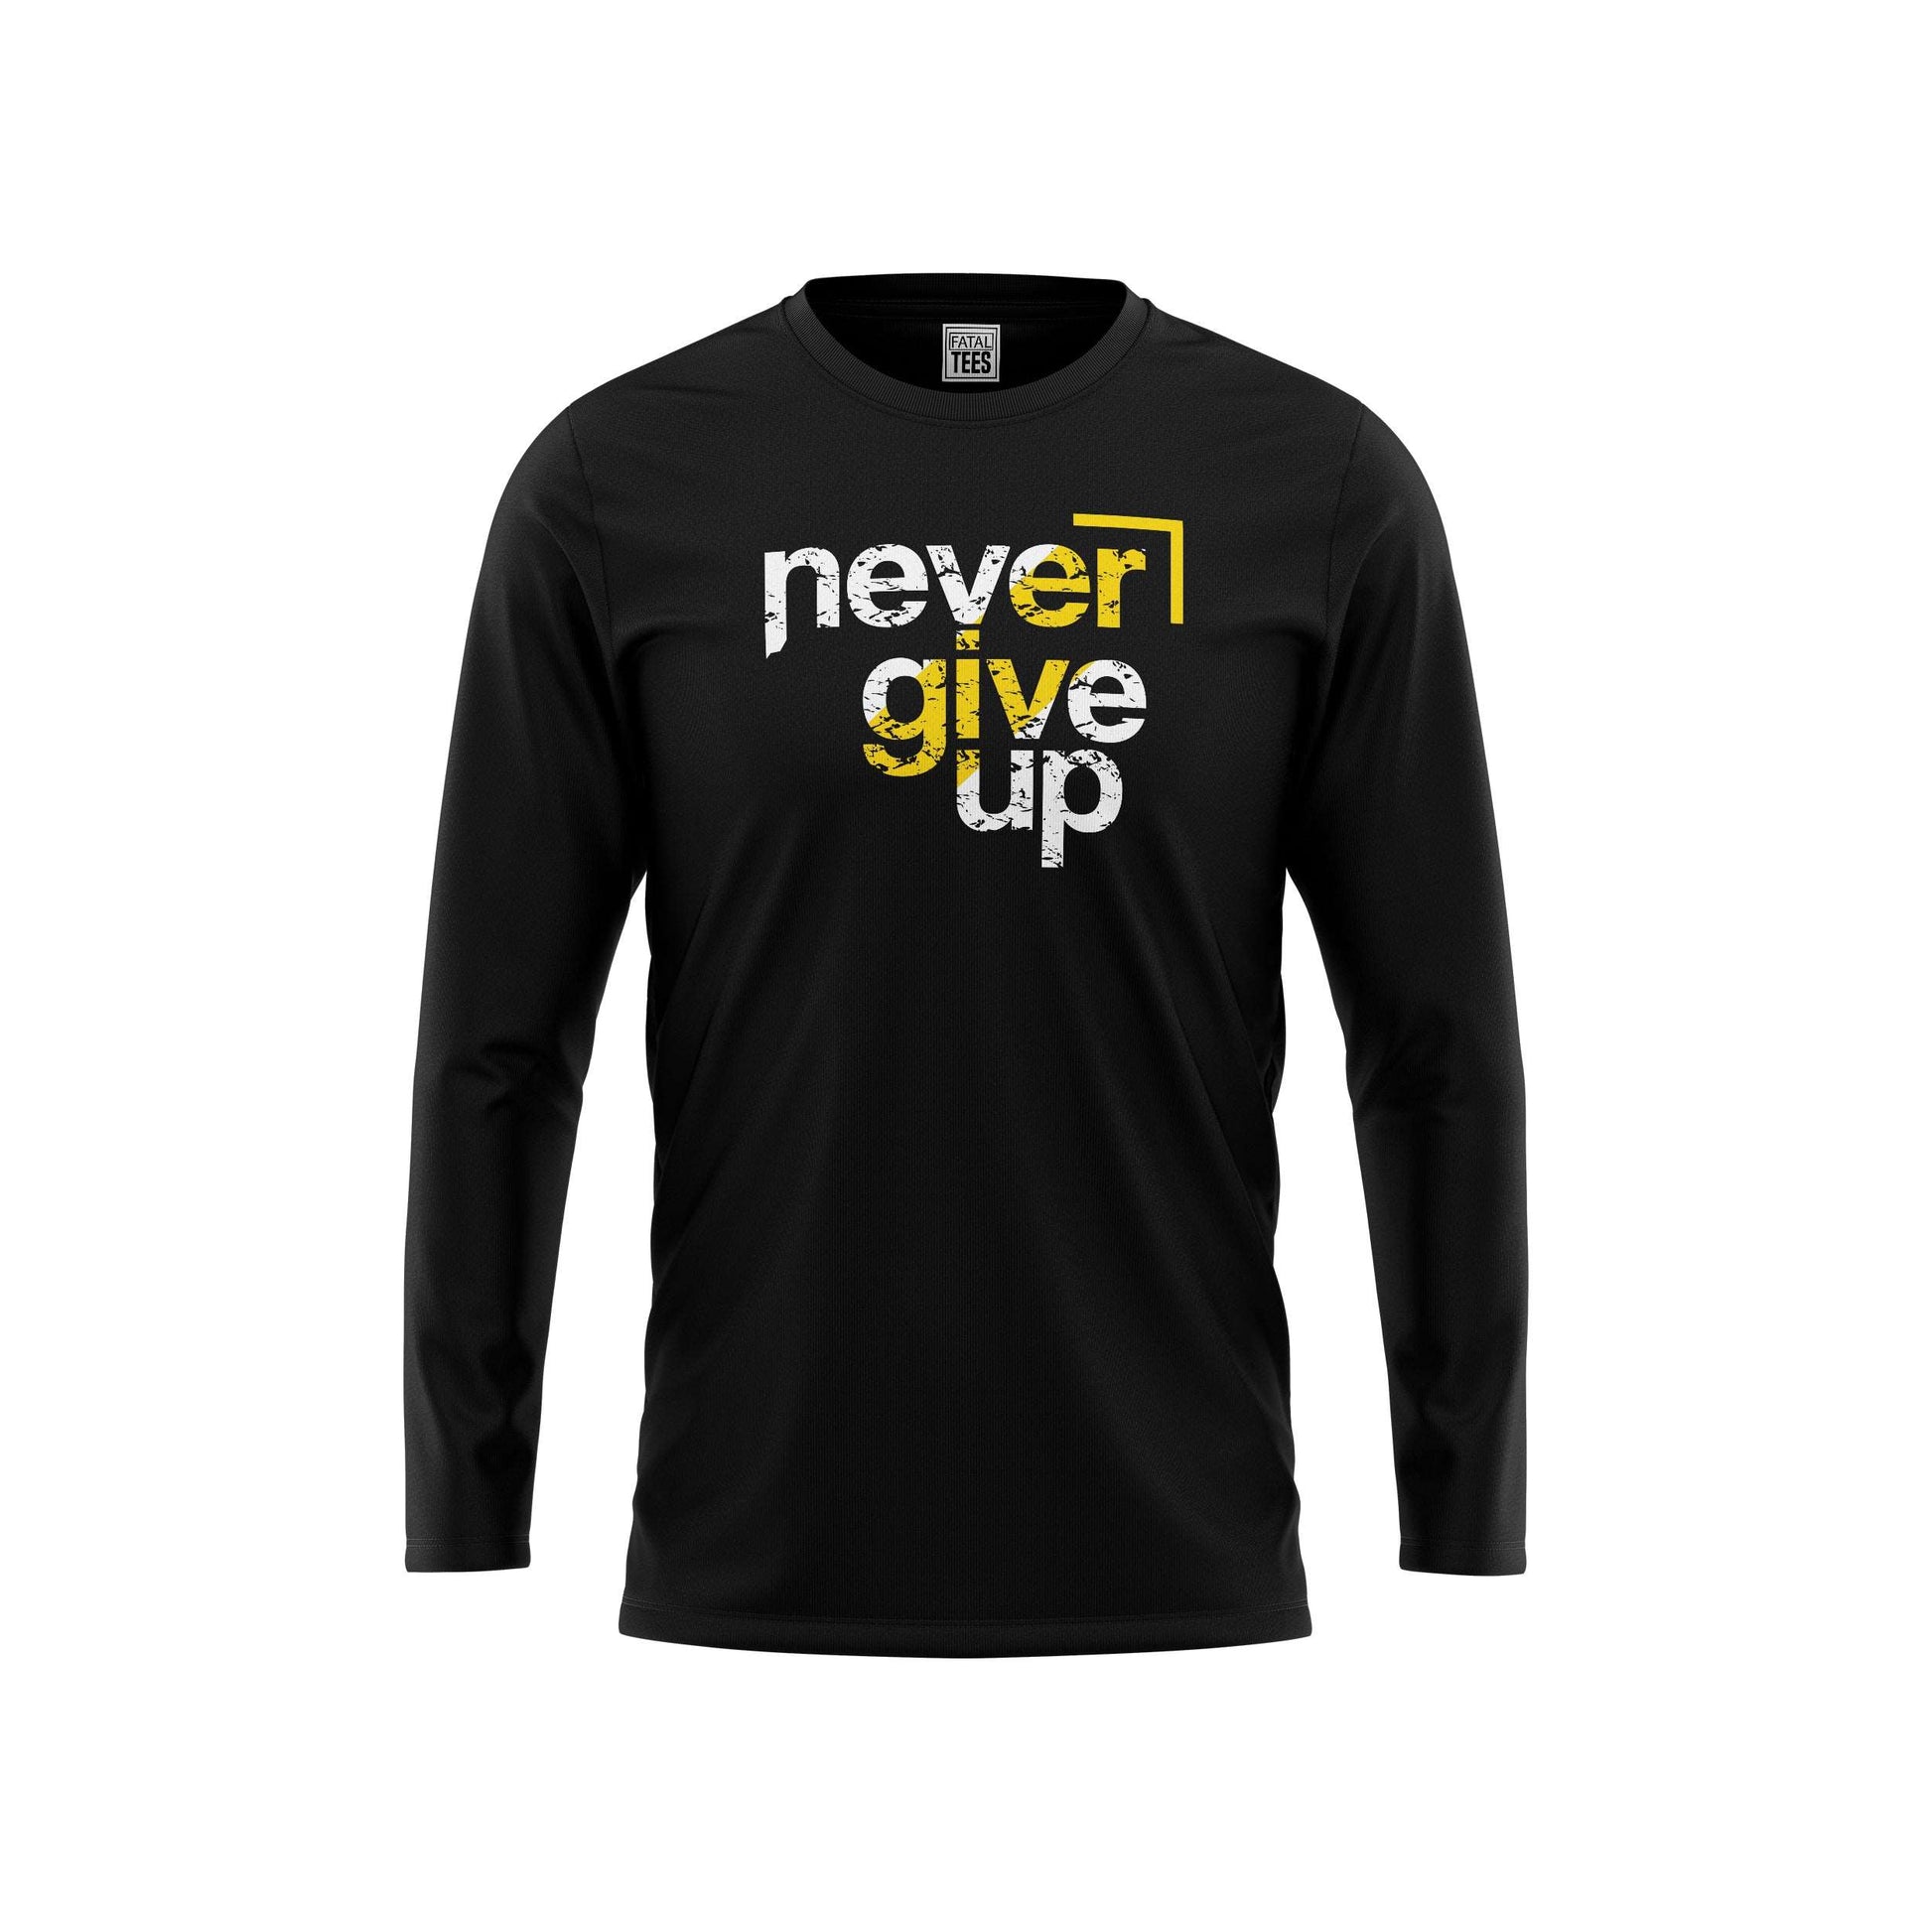 Never Give Up Tees Fatal Tees